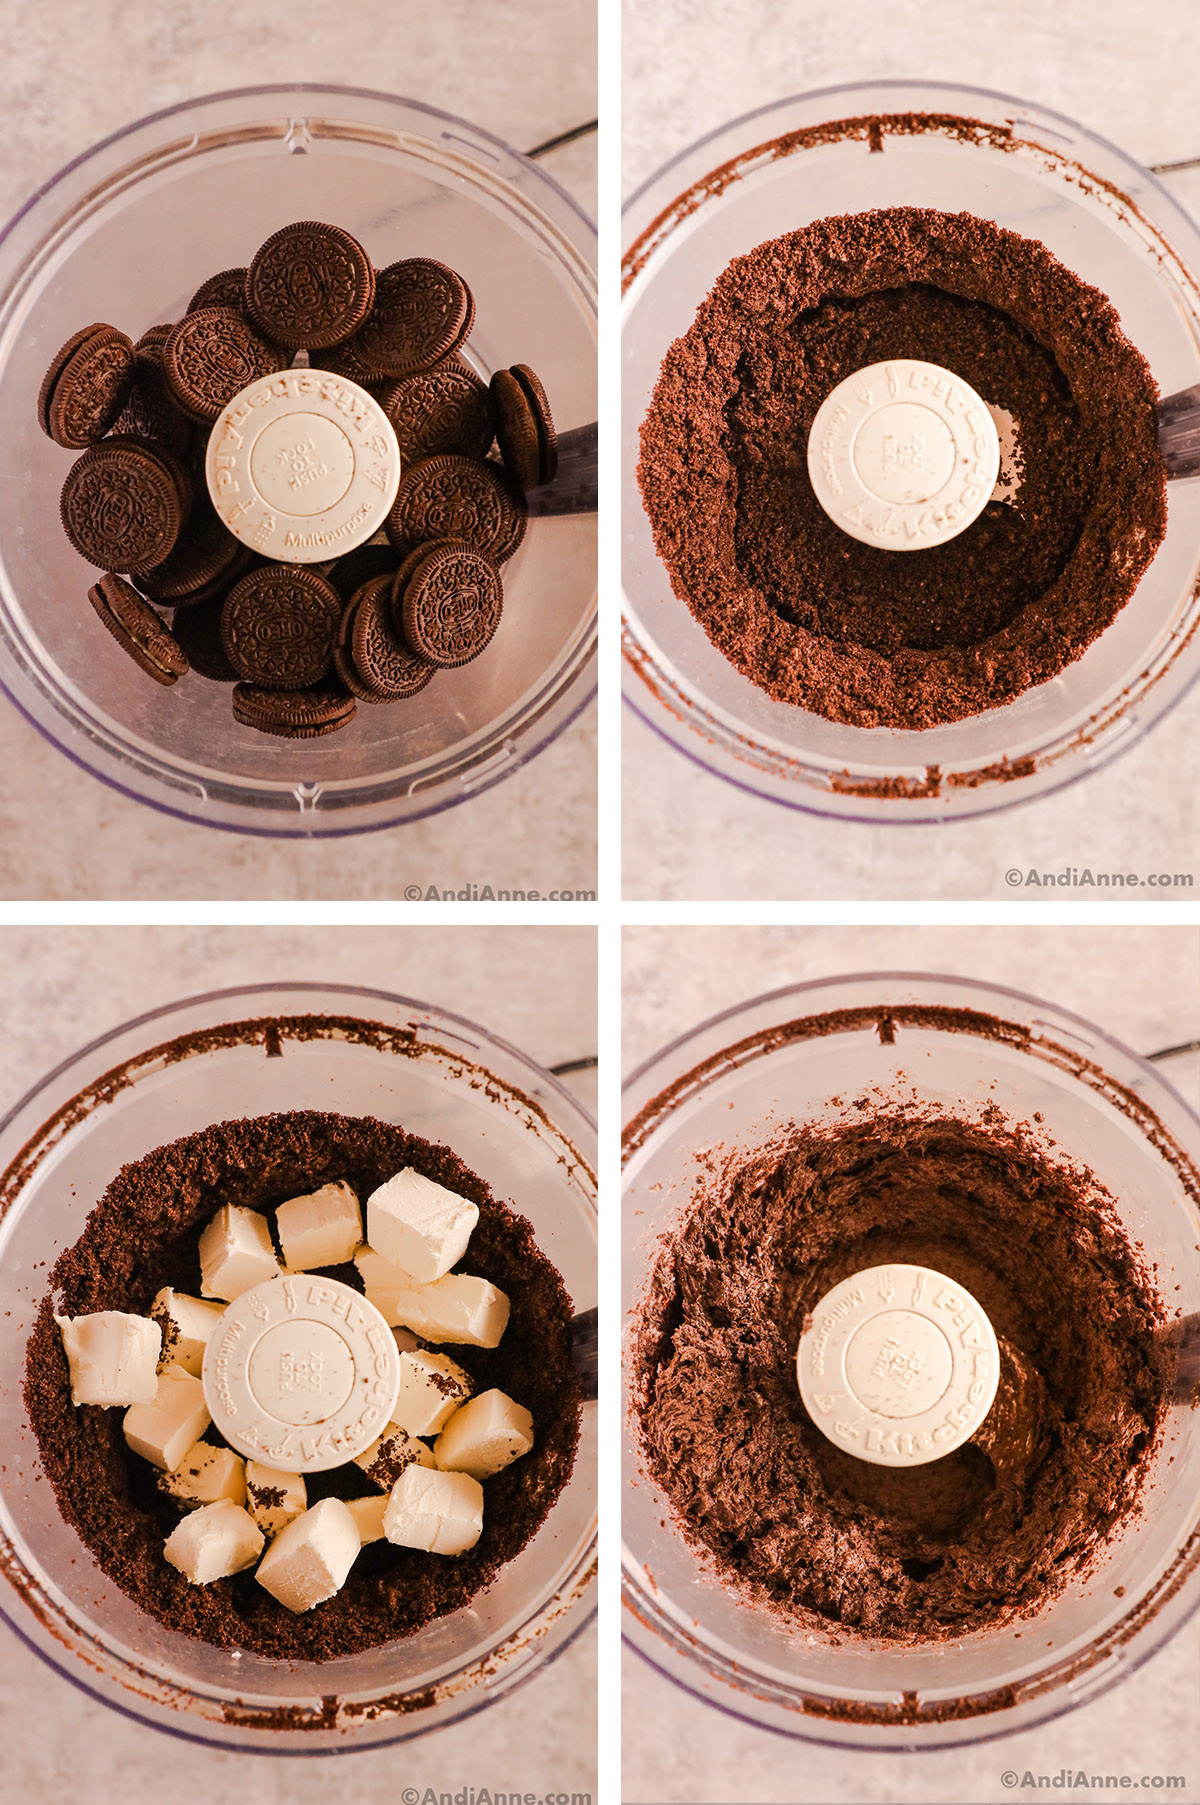 Four images of a food processor. First is oreo cookies inside, second is oreo crumbs, third is cubes of cream cheese over crumbs, fourth is creamy chocolate mixture.